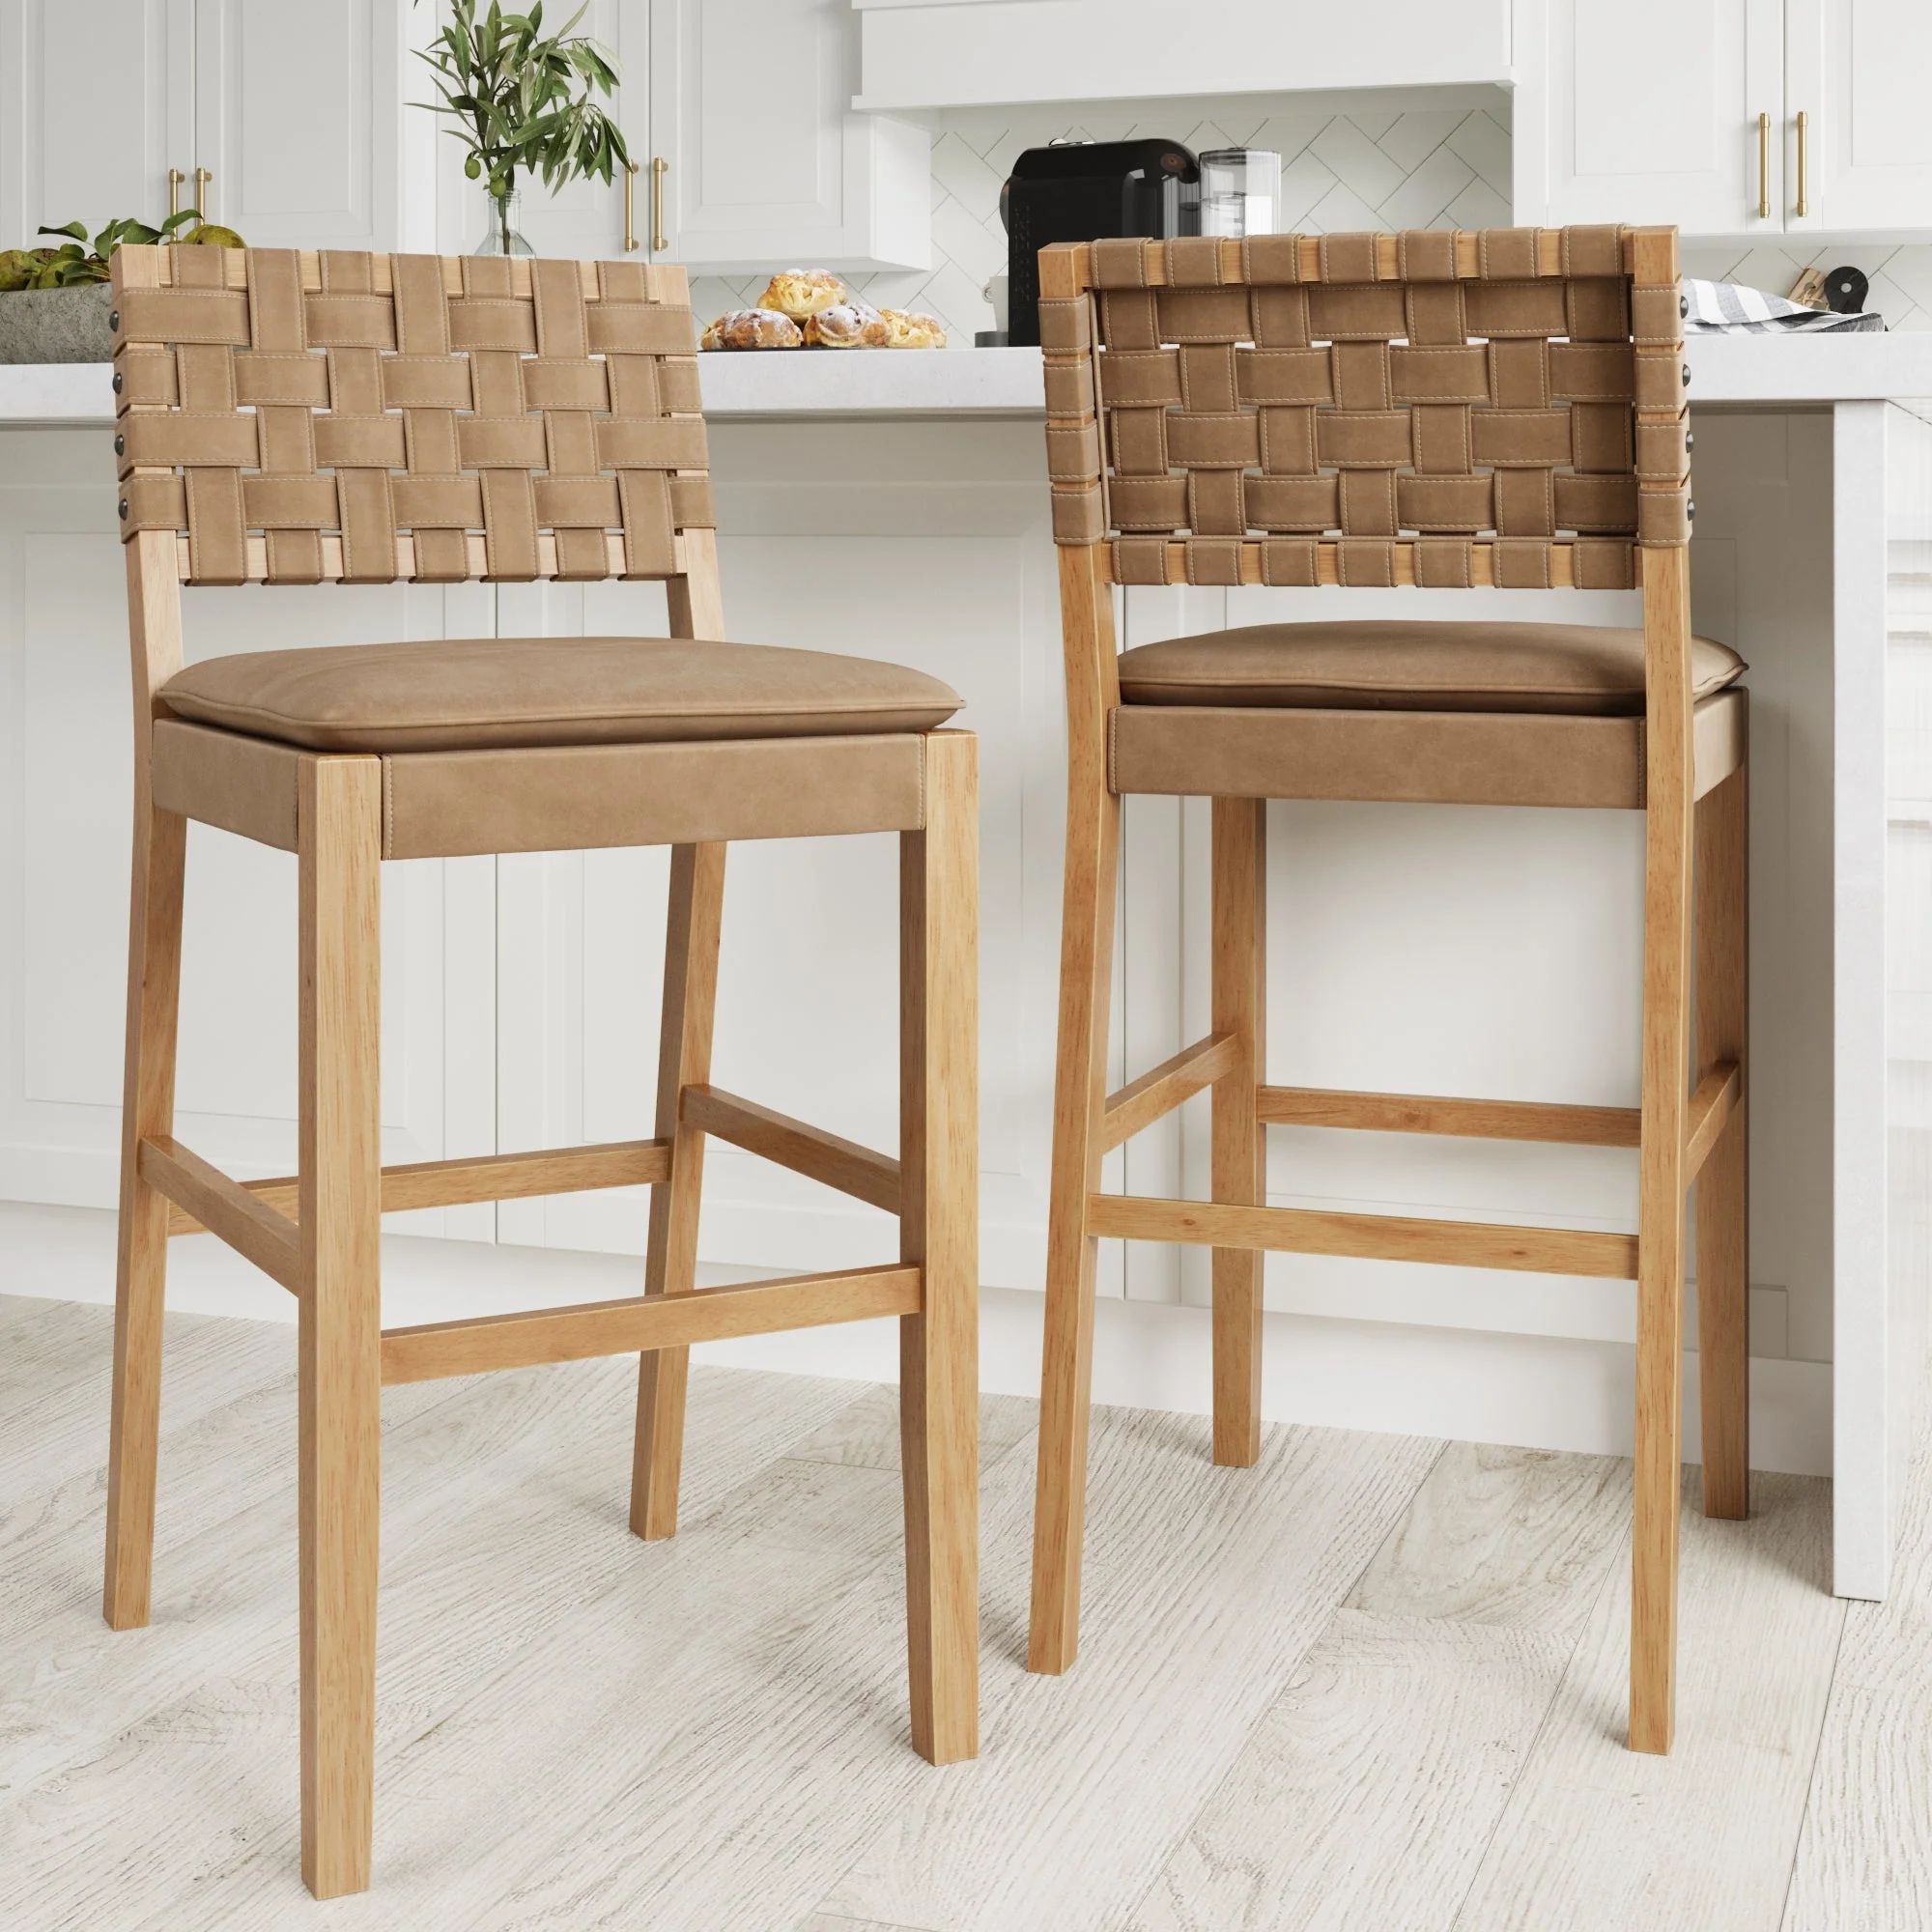 Set of 2 Faux Leather Woven Bar Stools Brown | Nathan James